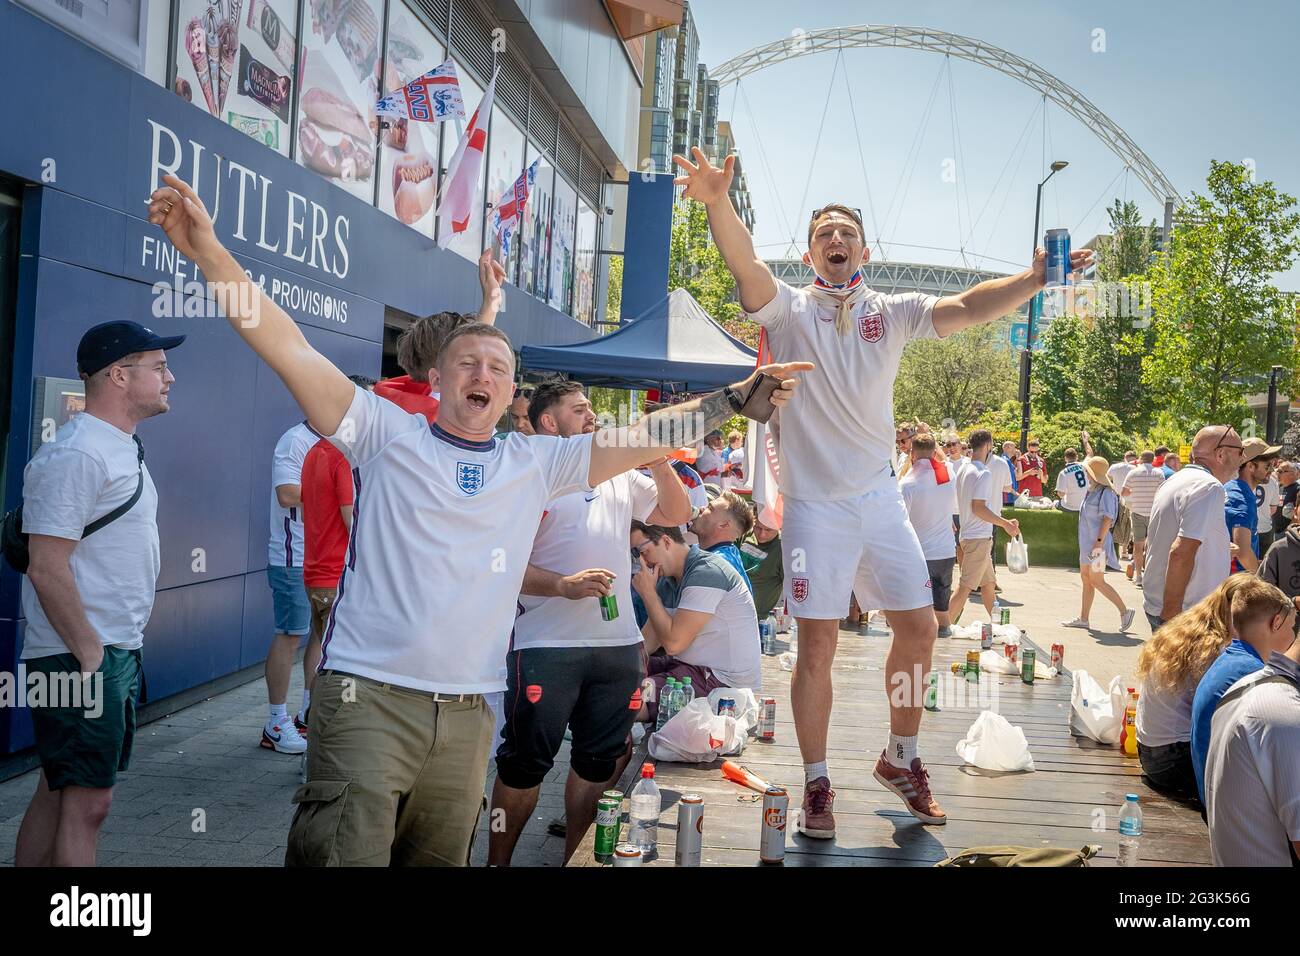 Euro 2020: Fans arrive at Wembley in a festive mood ready for England vs Croatia match, European Championships Group D. London, UK. Stock Photo